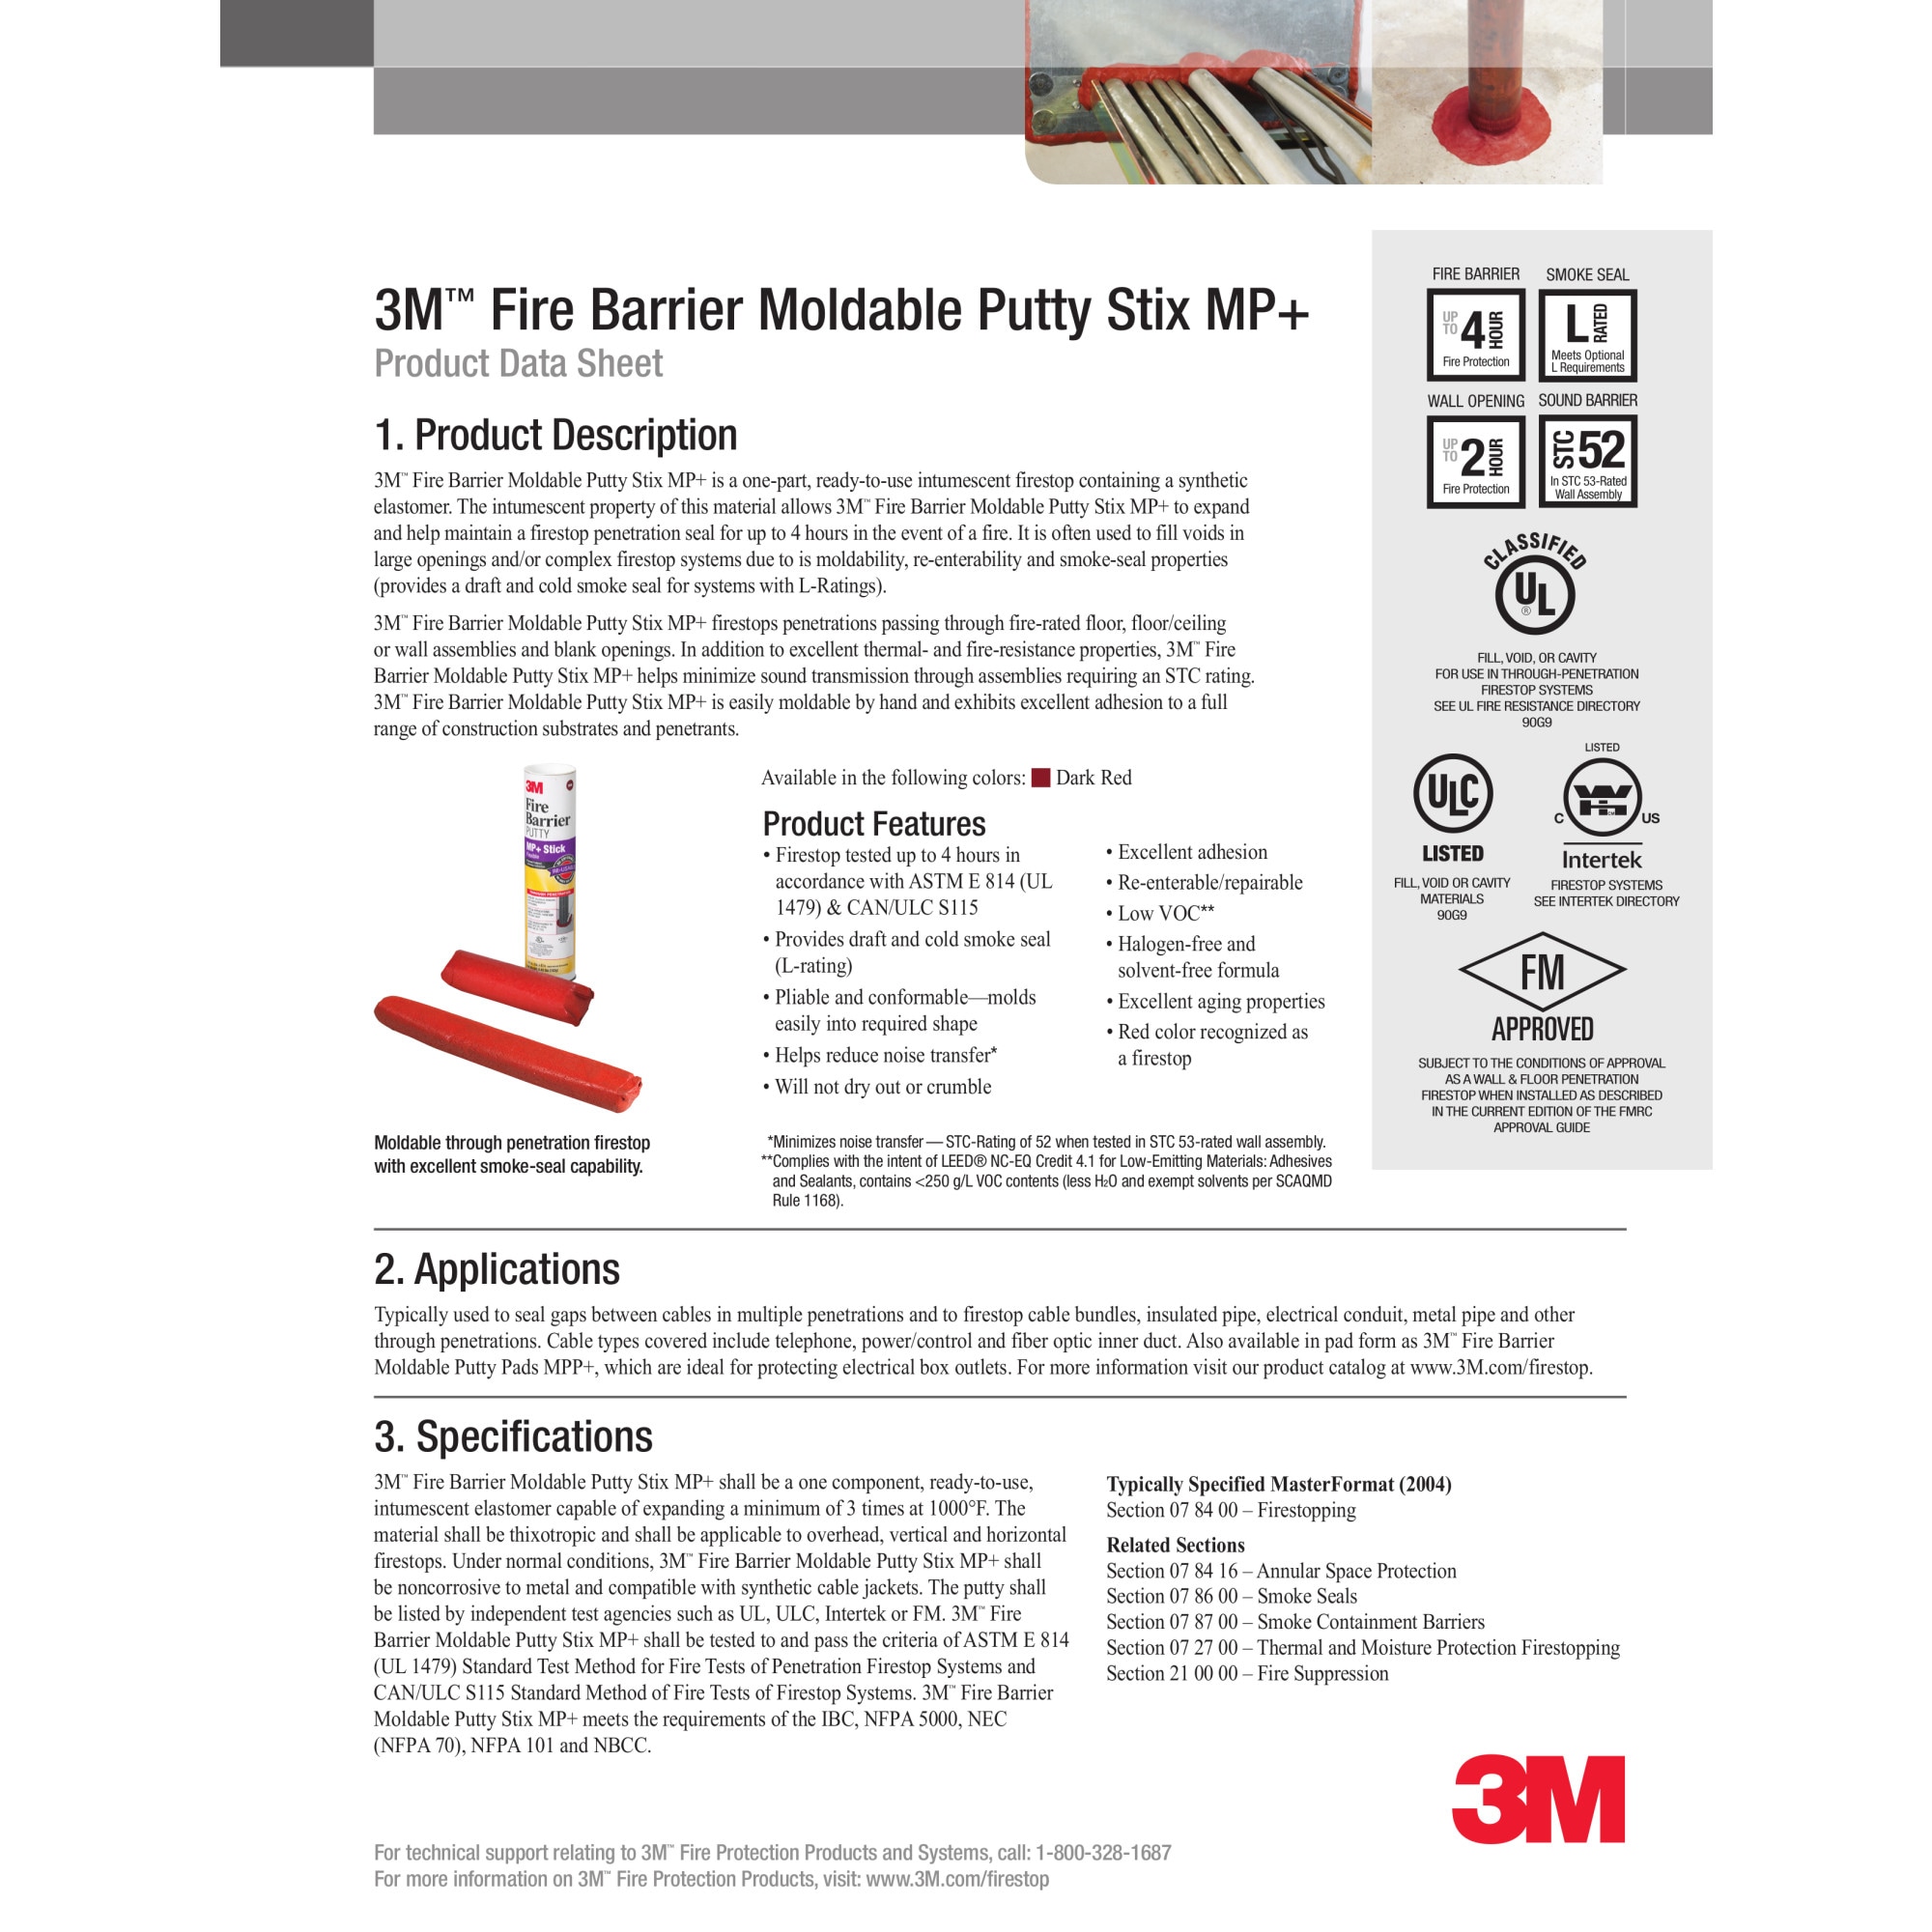 3M, Fire Barrier Moldable Putty Pads, Fire Safety